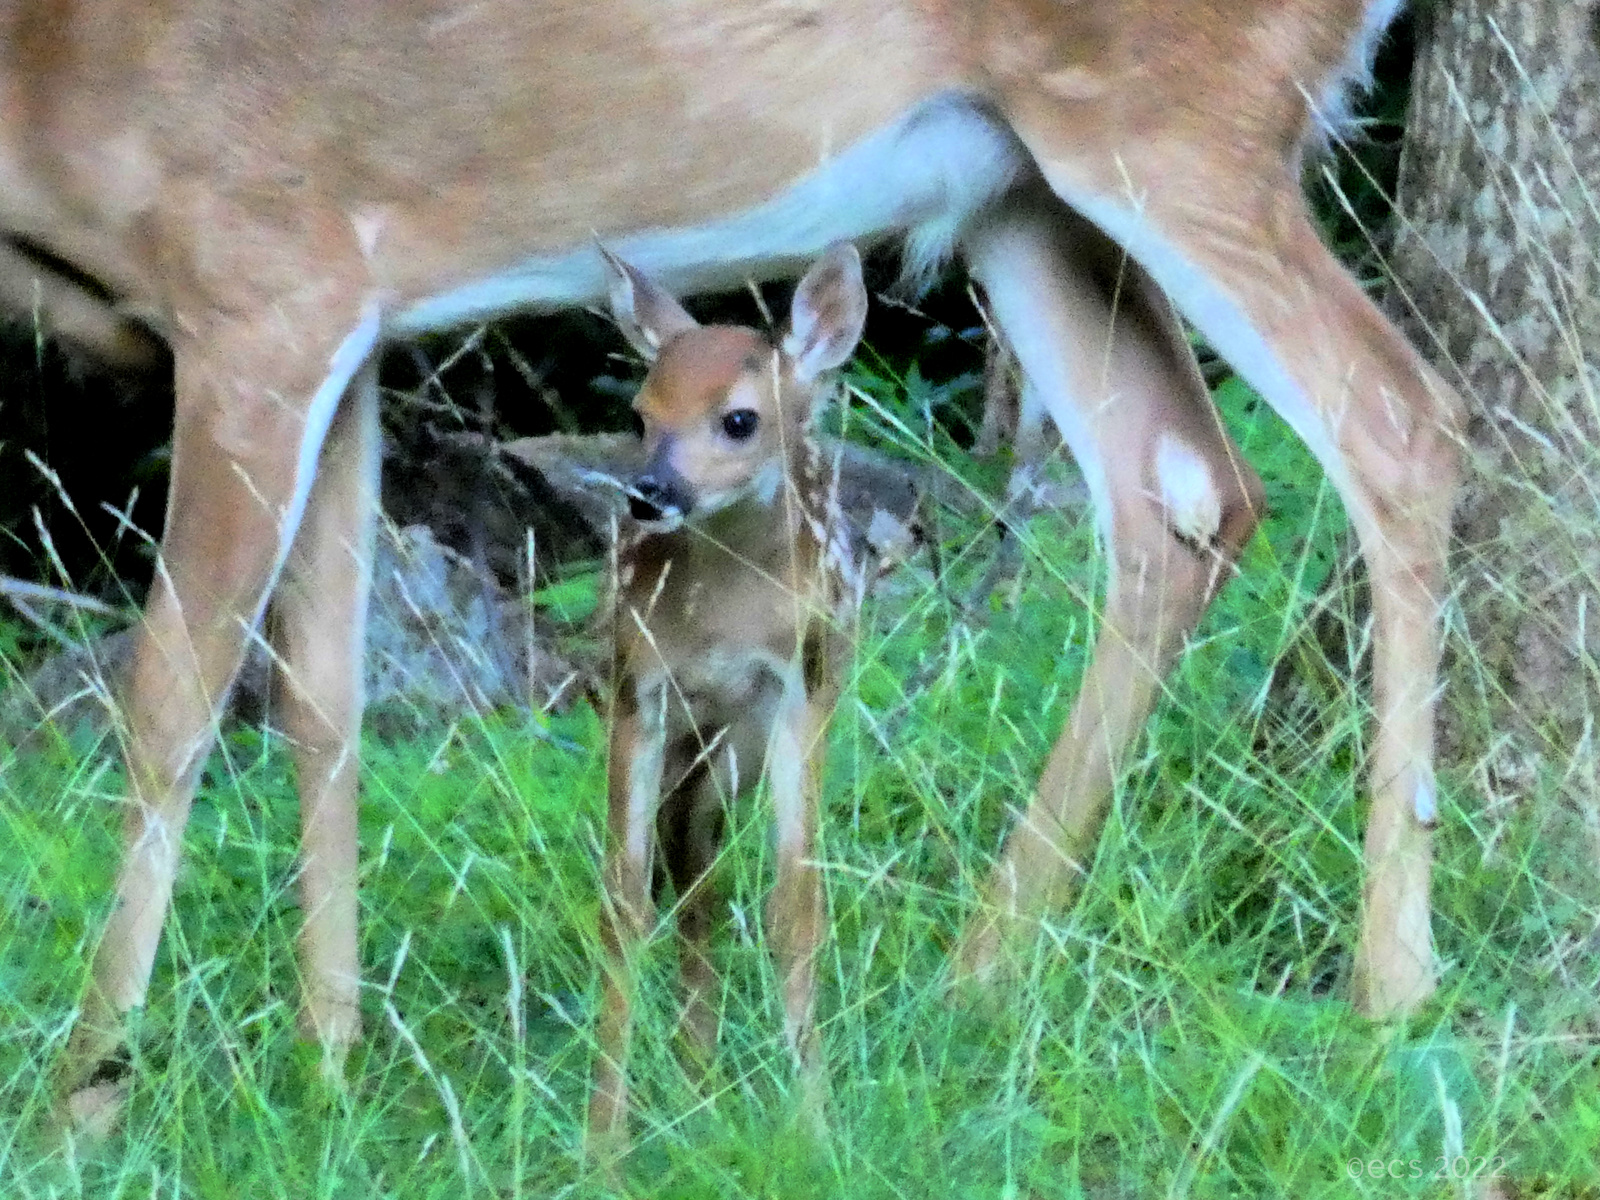 June 12, 2022 - Fawn and Doe in Bent Tree